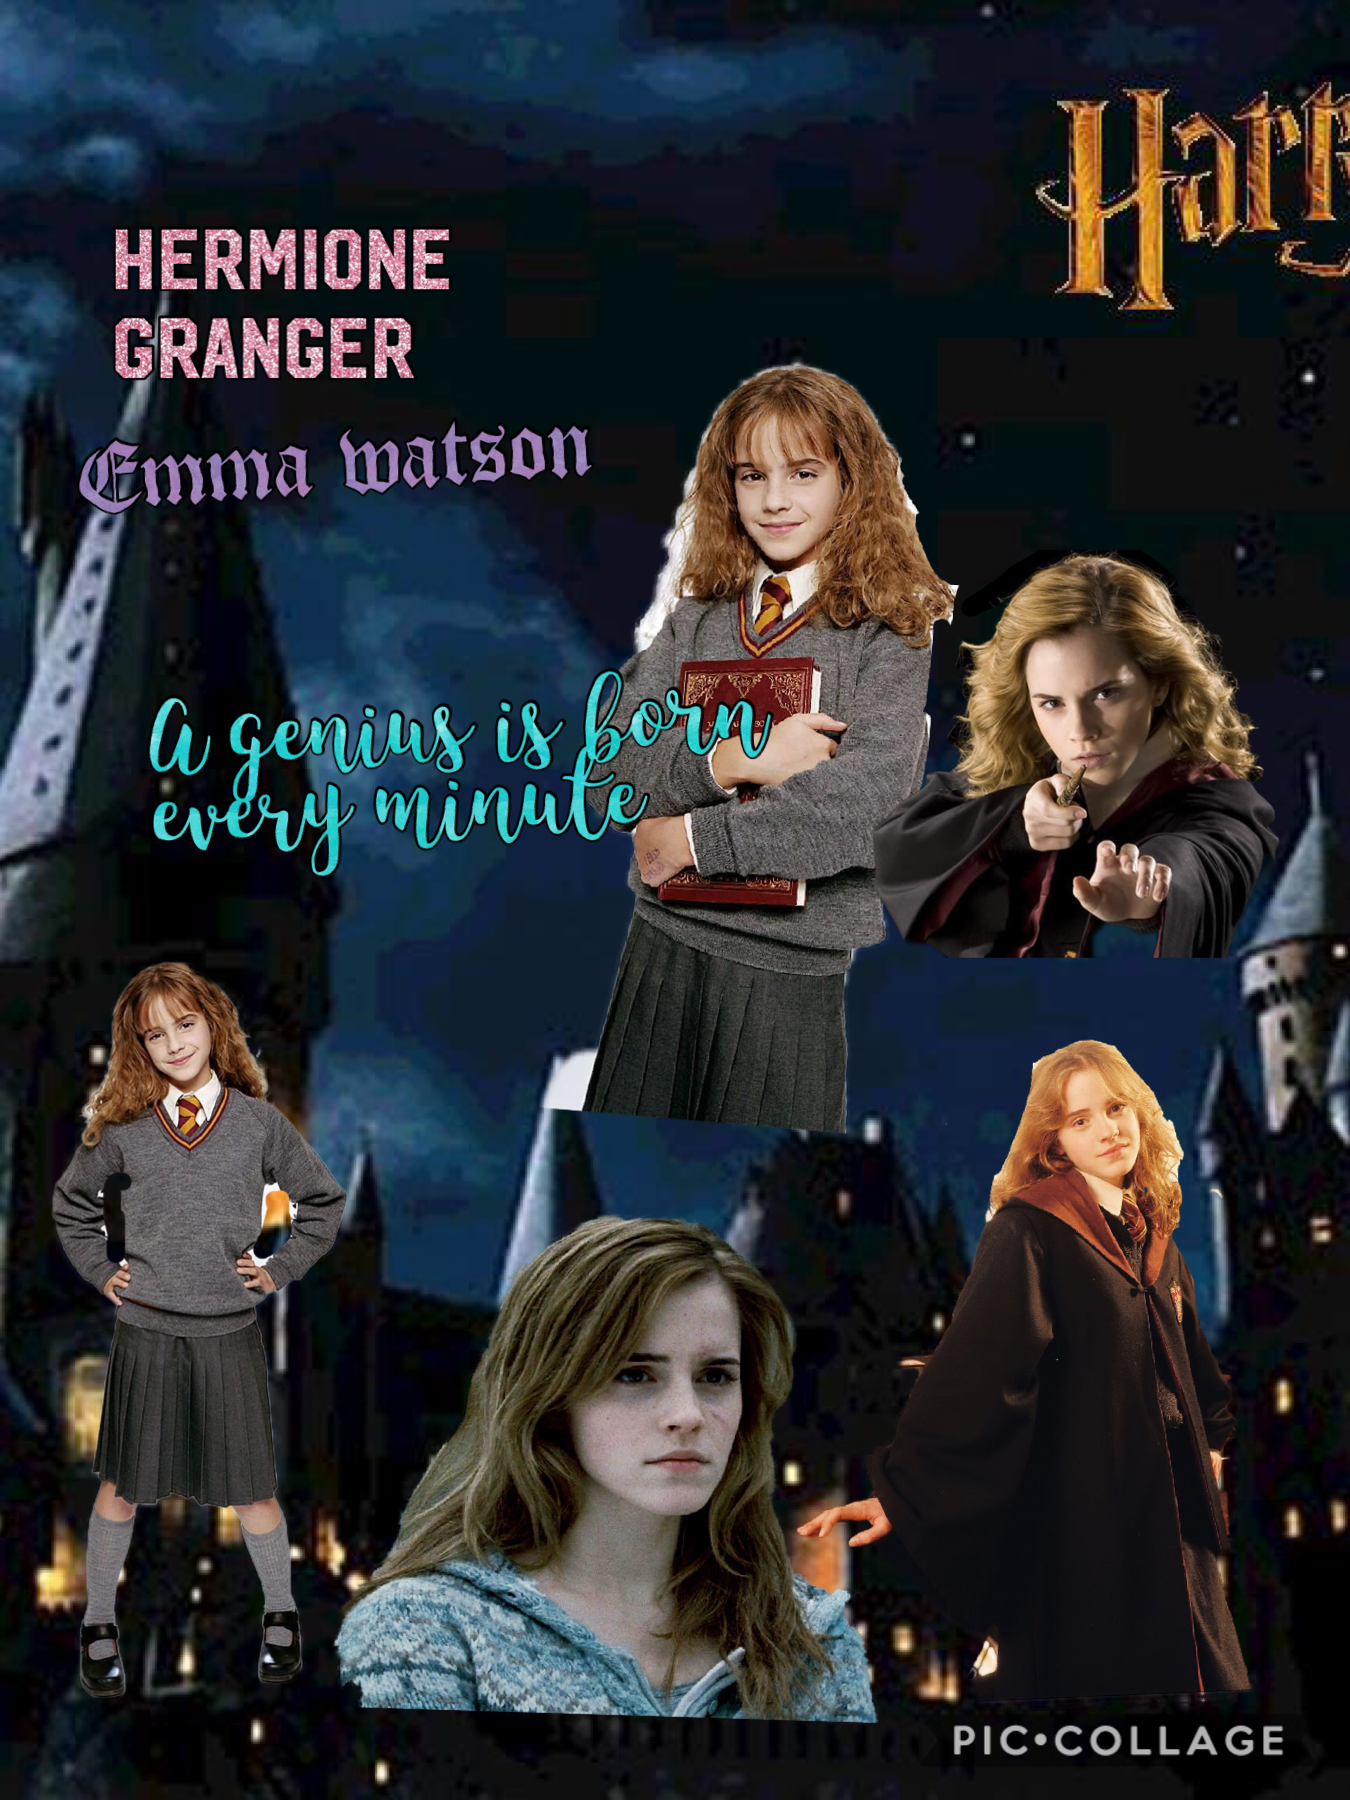 Her Ione granger for all HP frens